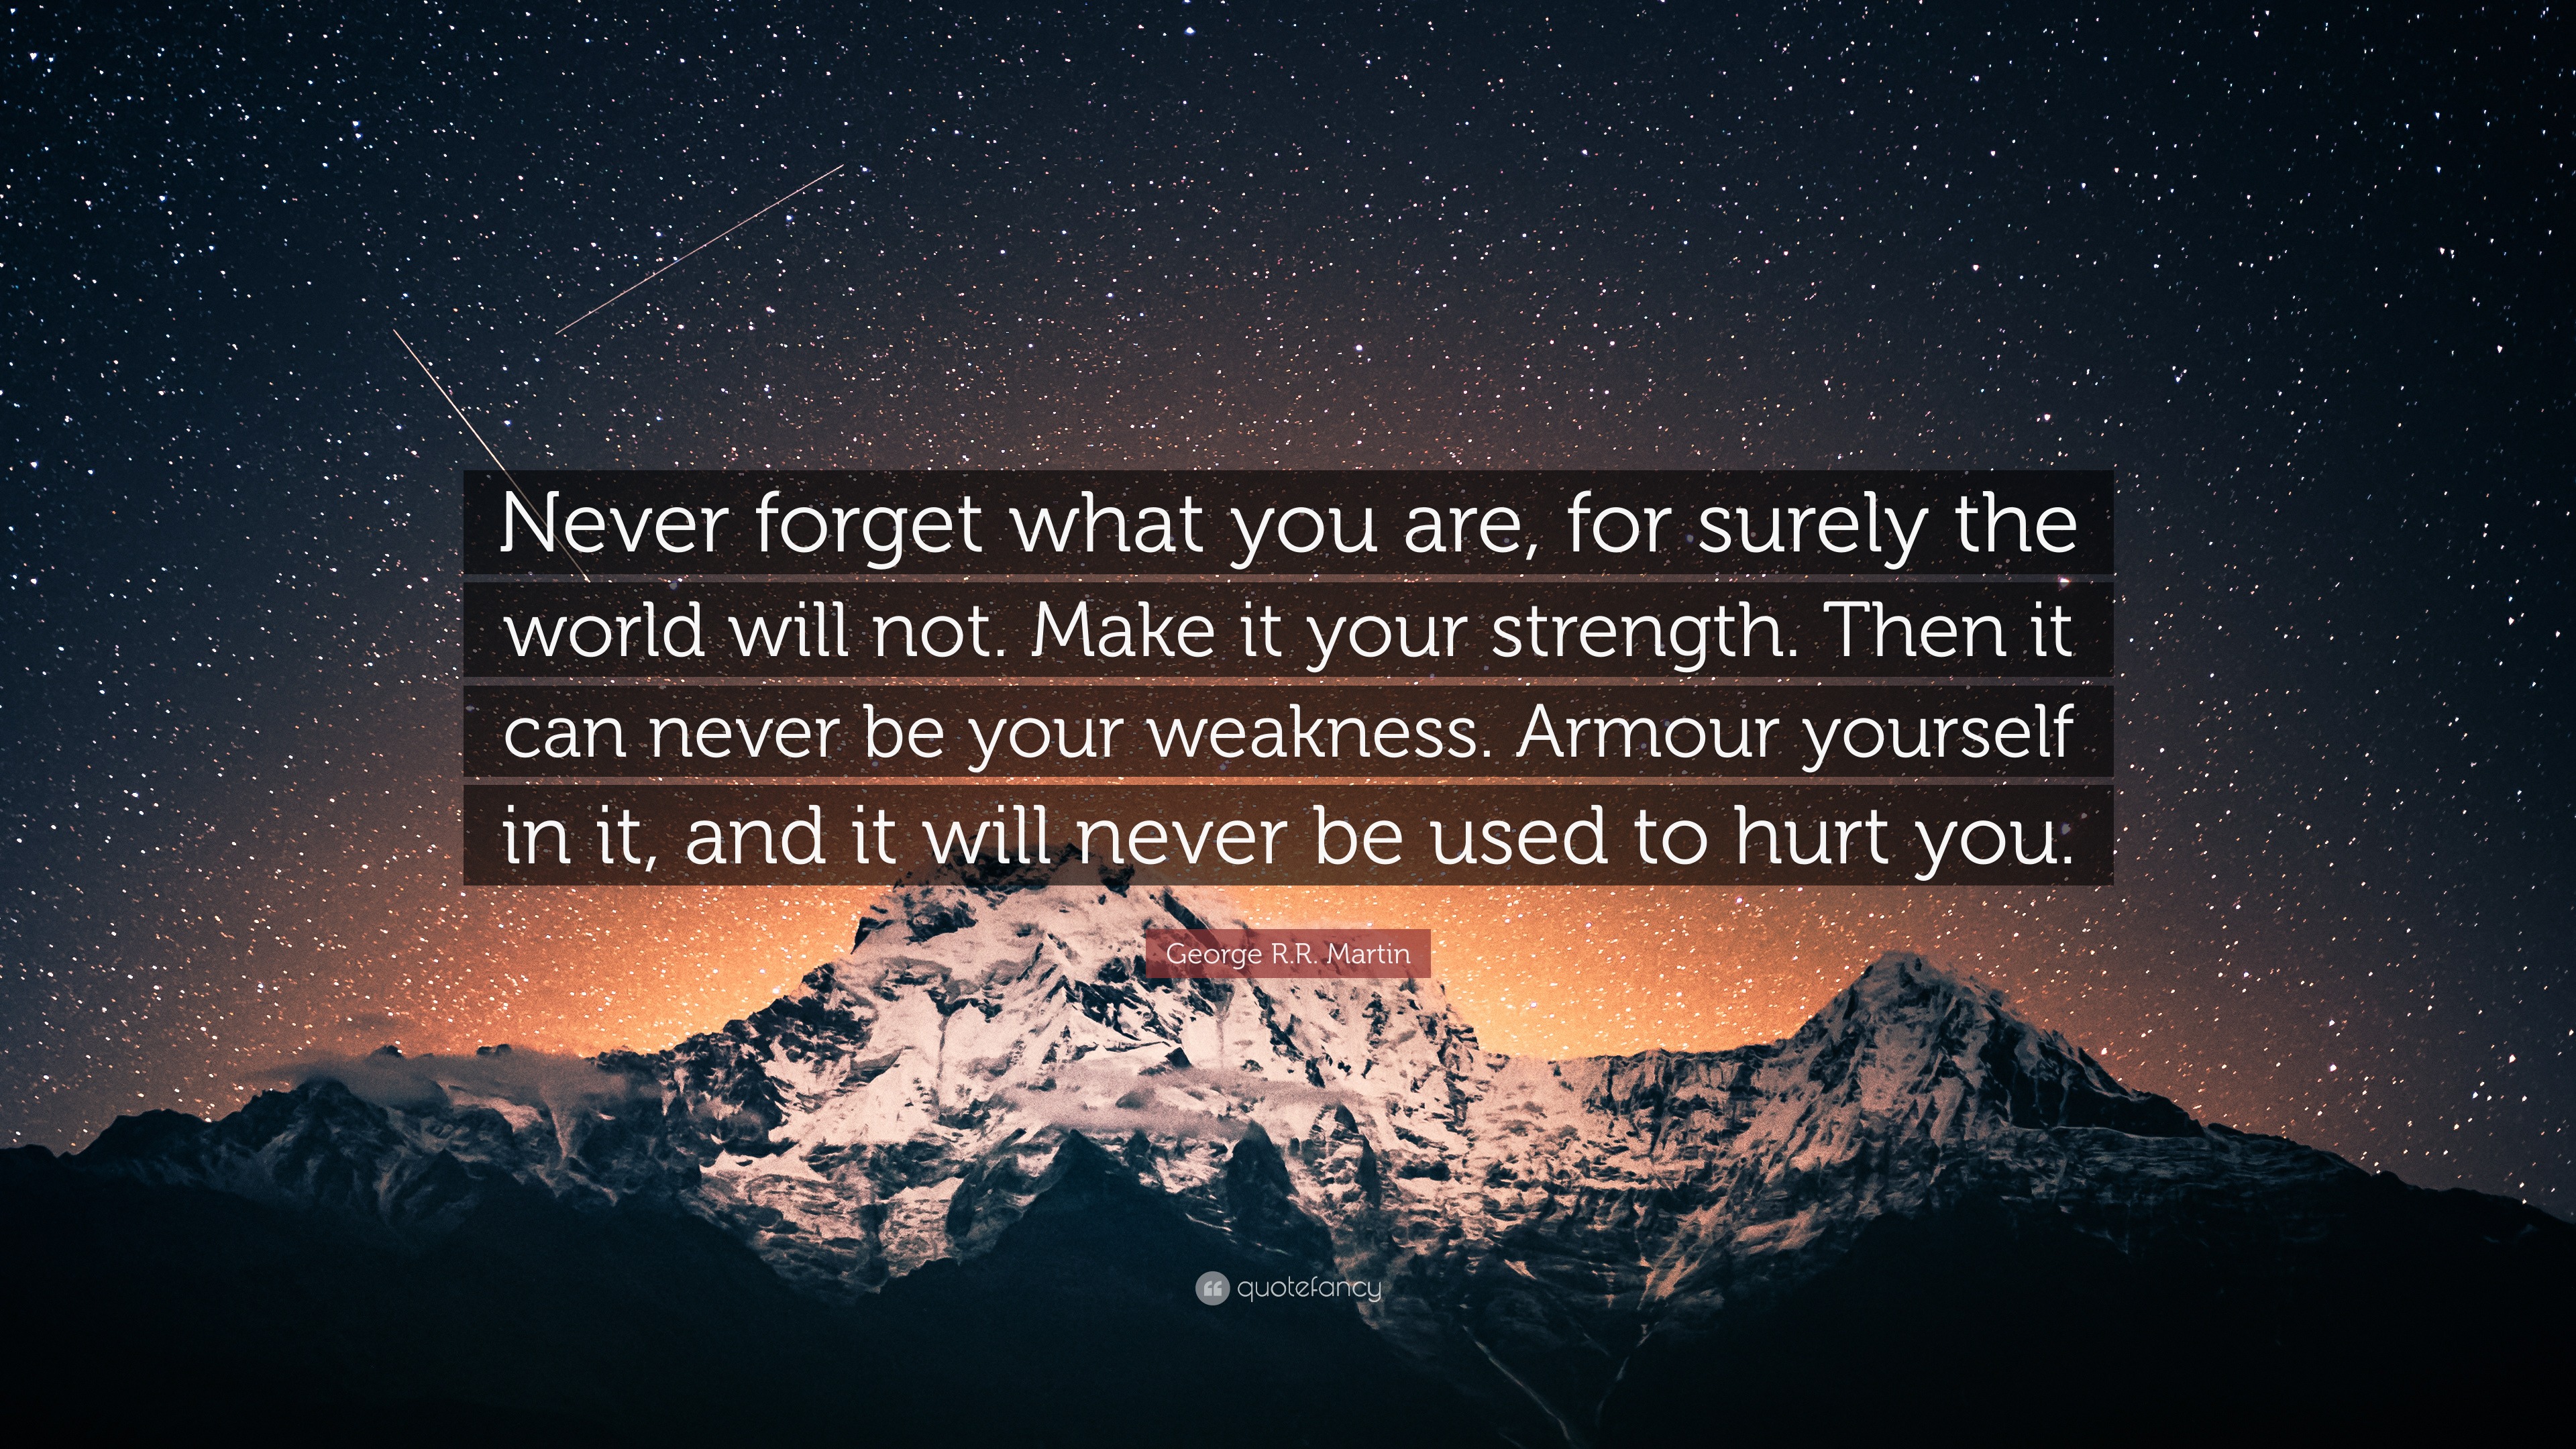 George R.R. Martin Quote: “Never forget what you are, for surely the